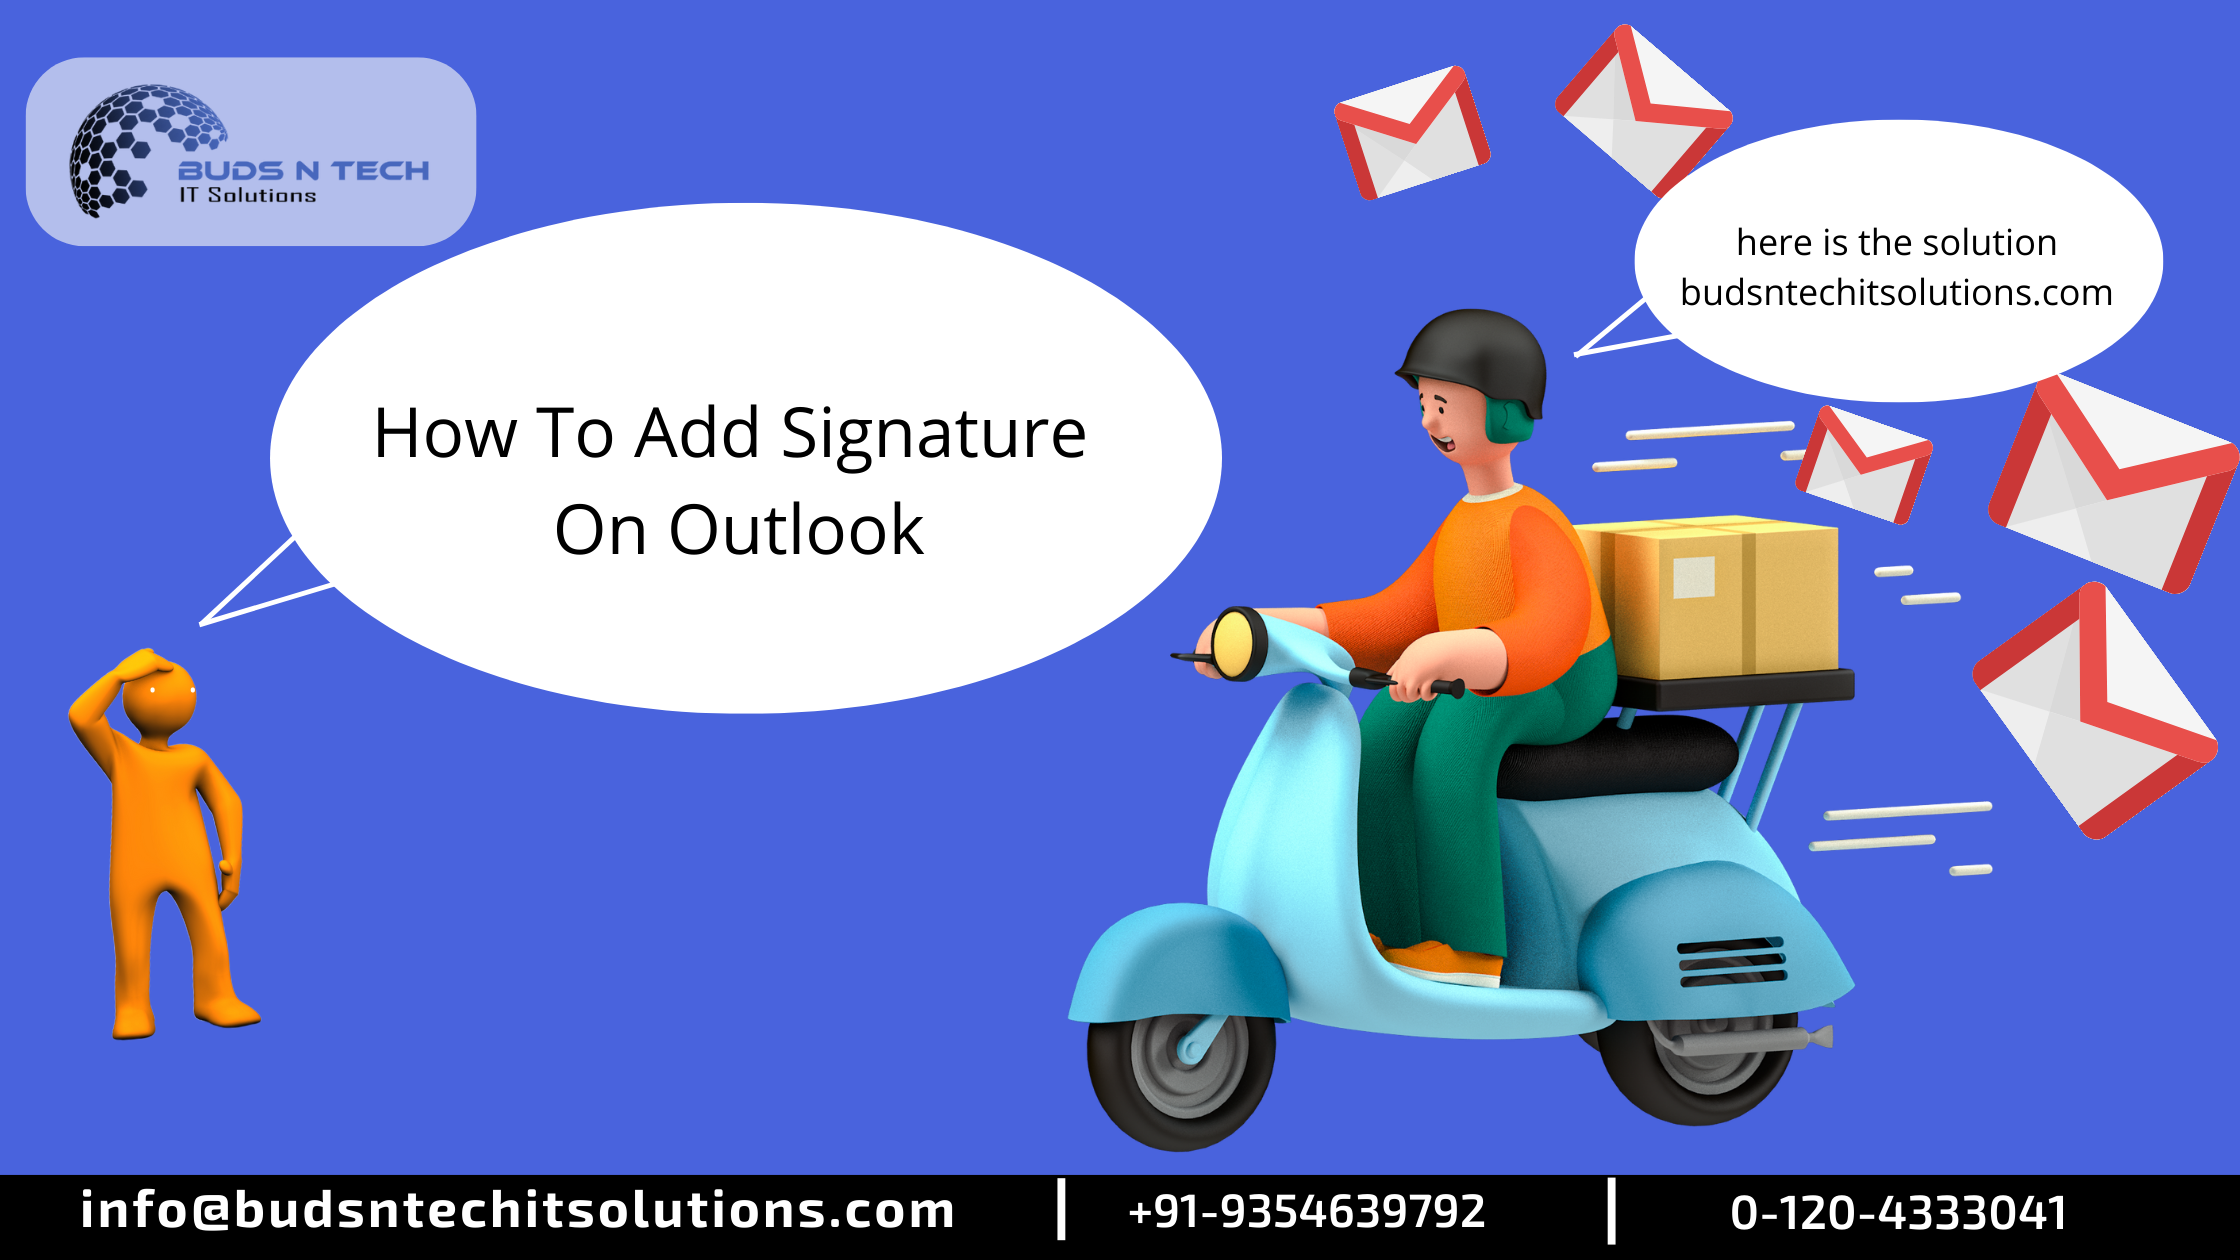 How To Add Signature On Outlook Is Going To Change Your Business Strategies?